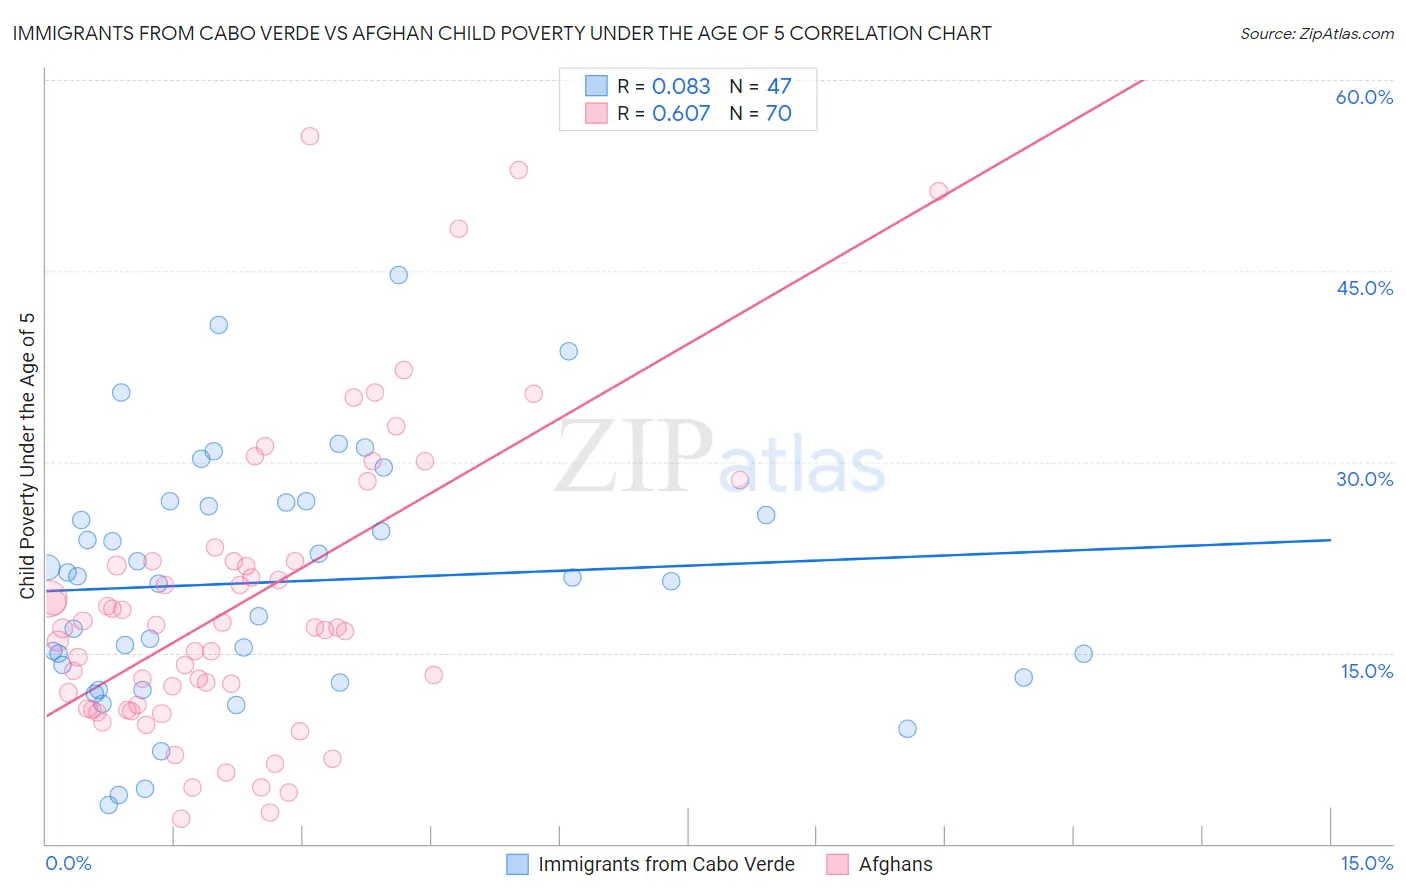 Immigrants from Cabo Verde vs Afghan Child Poverty Under the Age of 5